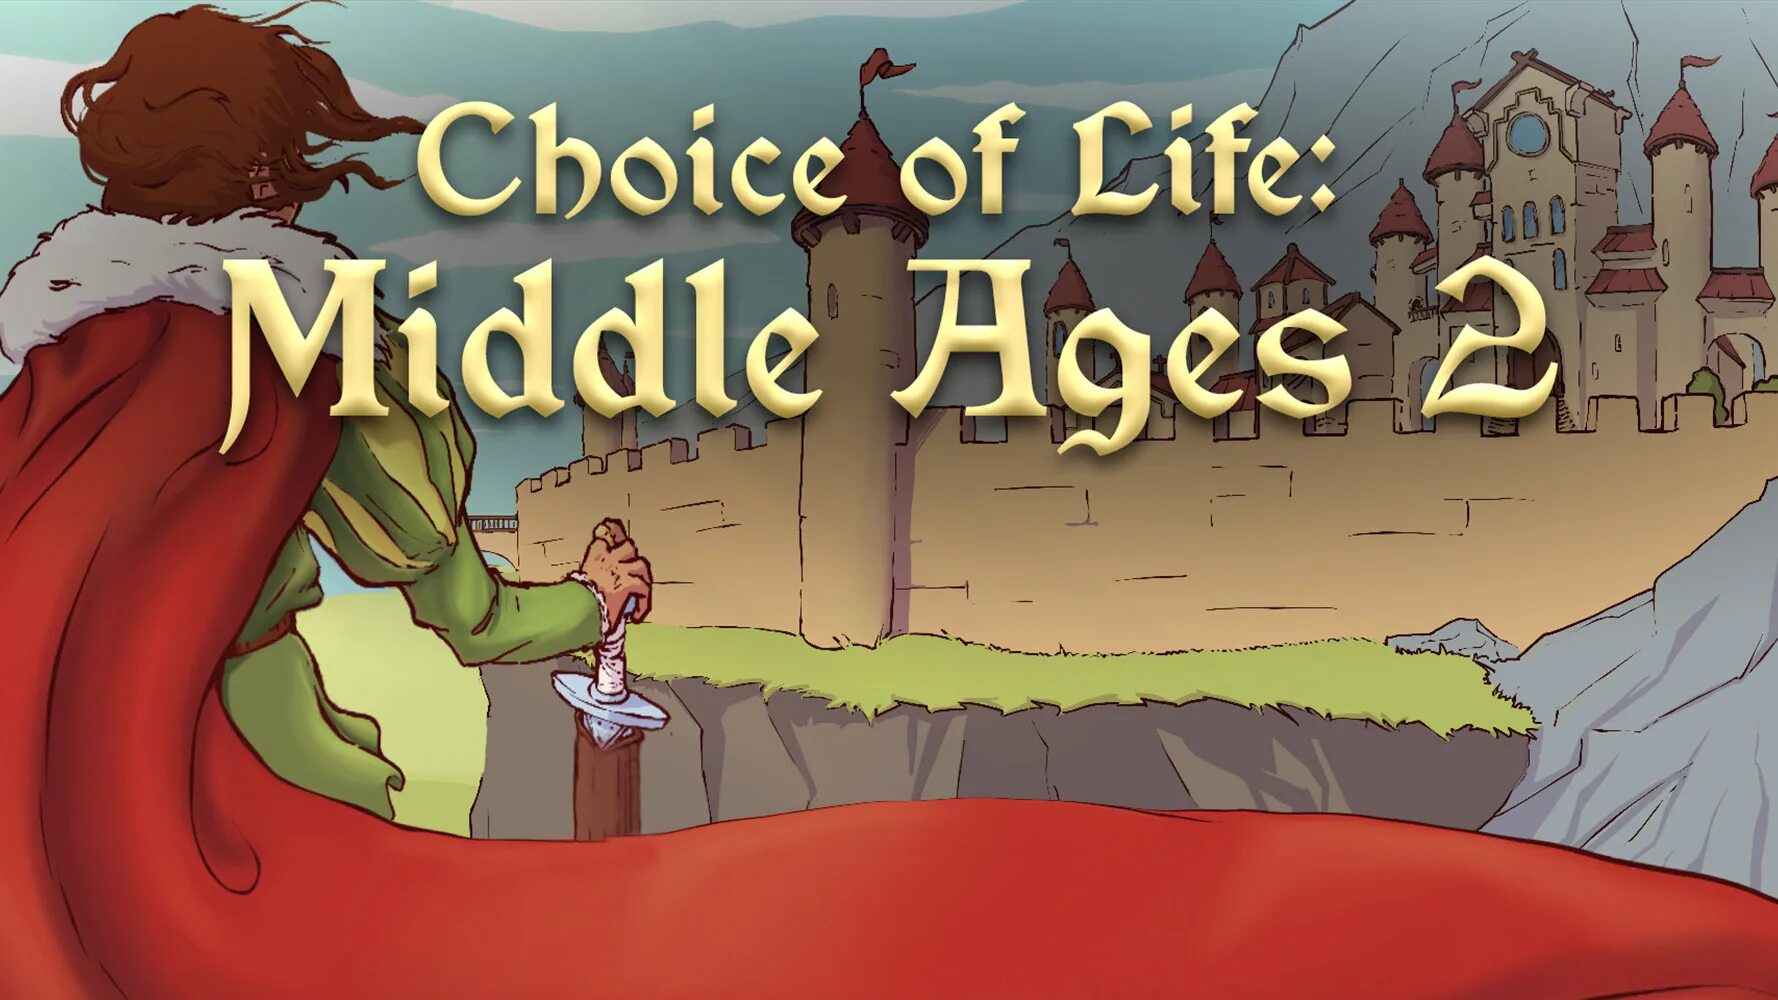 Игра choice of Life Middle ages 2. The choice of Life Middle ages игра. Серпантина choice of Life Middle ages 2. The choice of Life Middle ages карта.